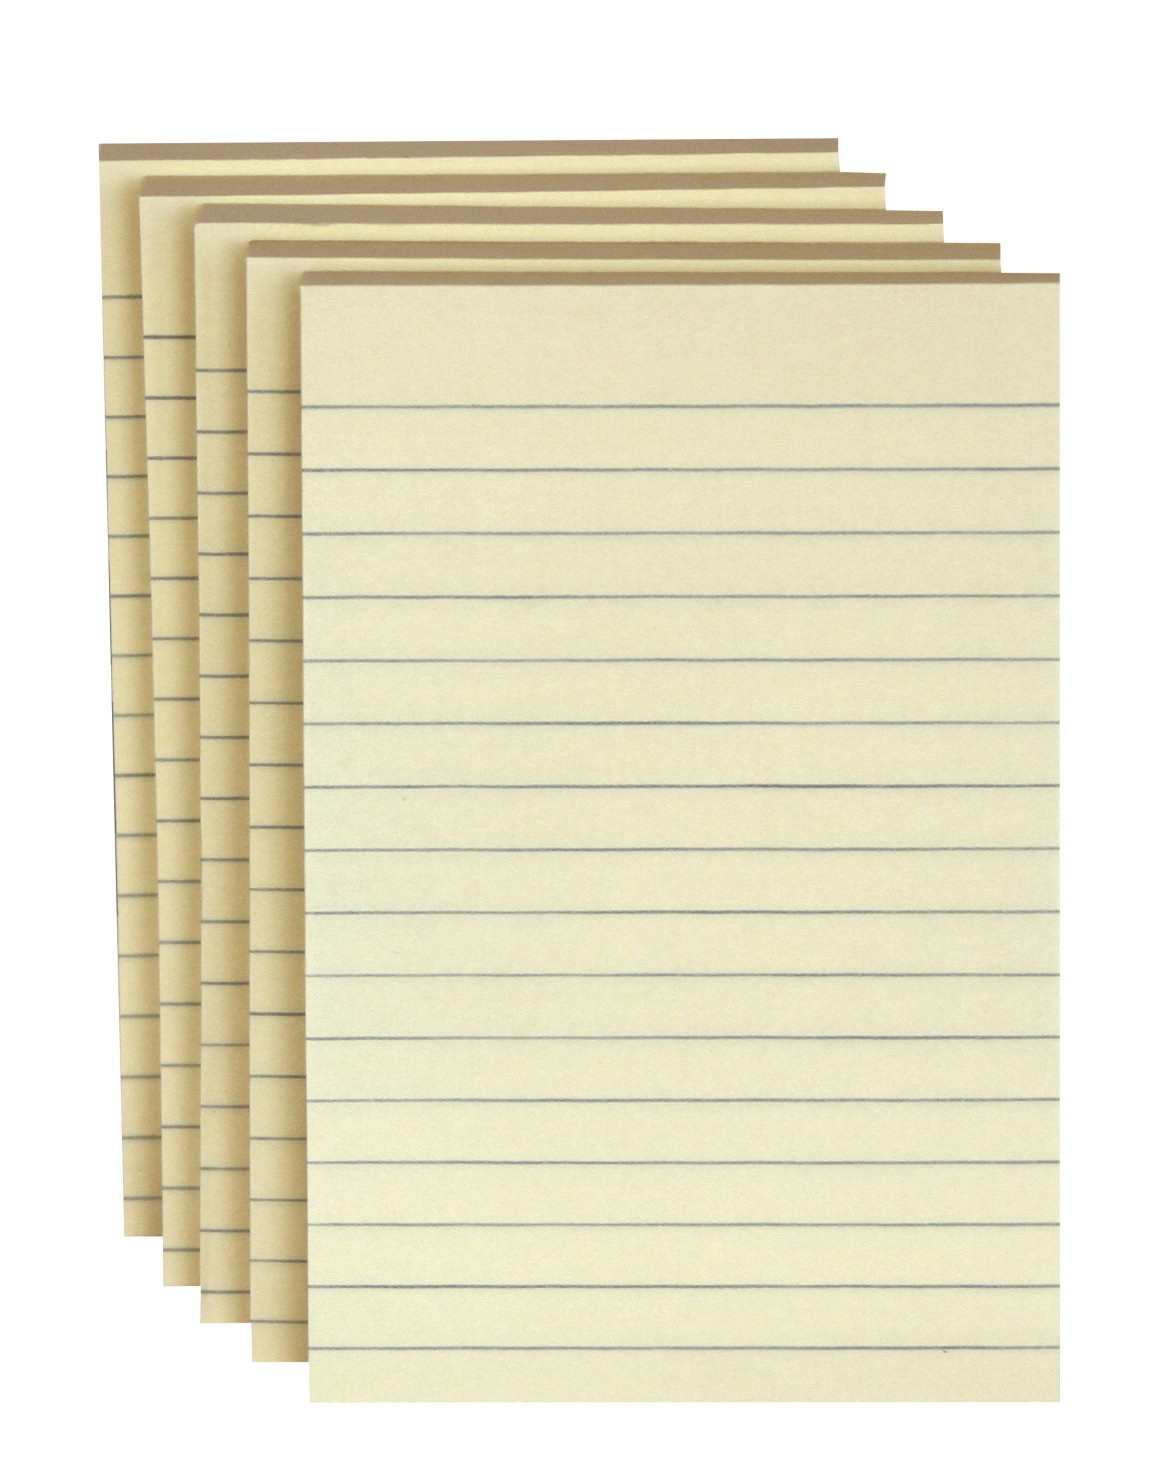 4 X 6 Self Stick Notes, Lined, 100 Sheets/Pad, Yellow - 5/Pkg